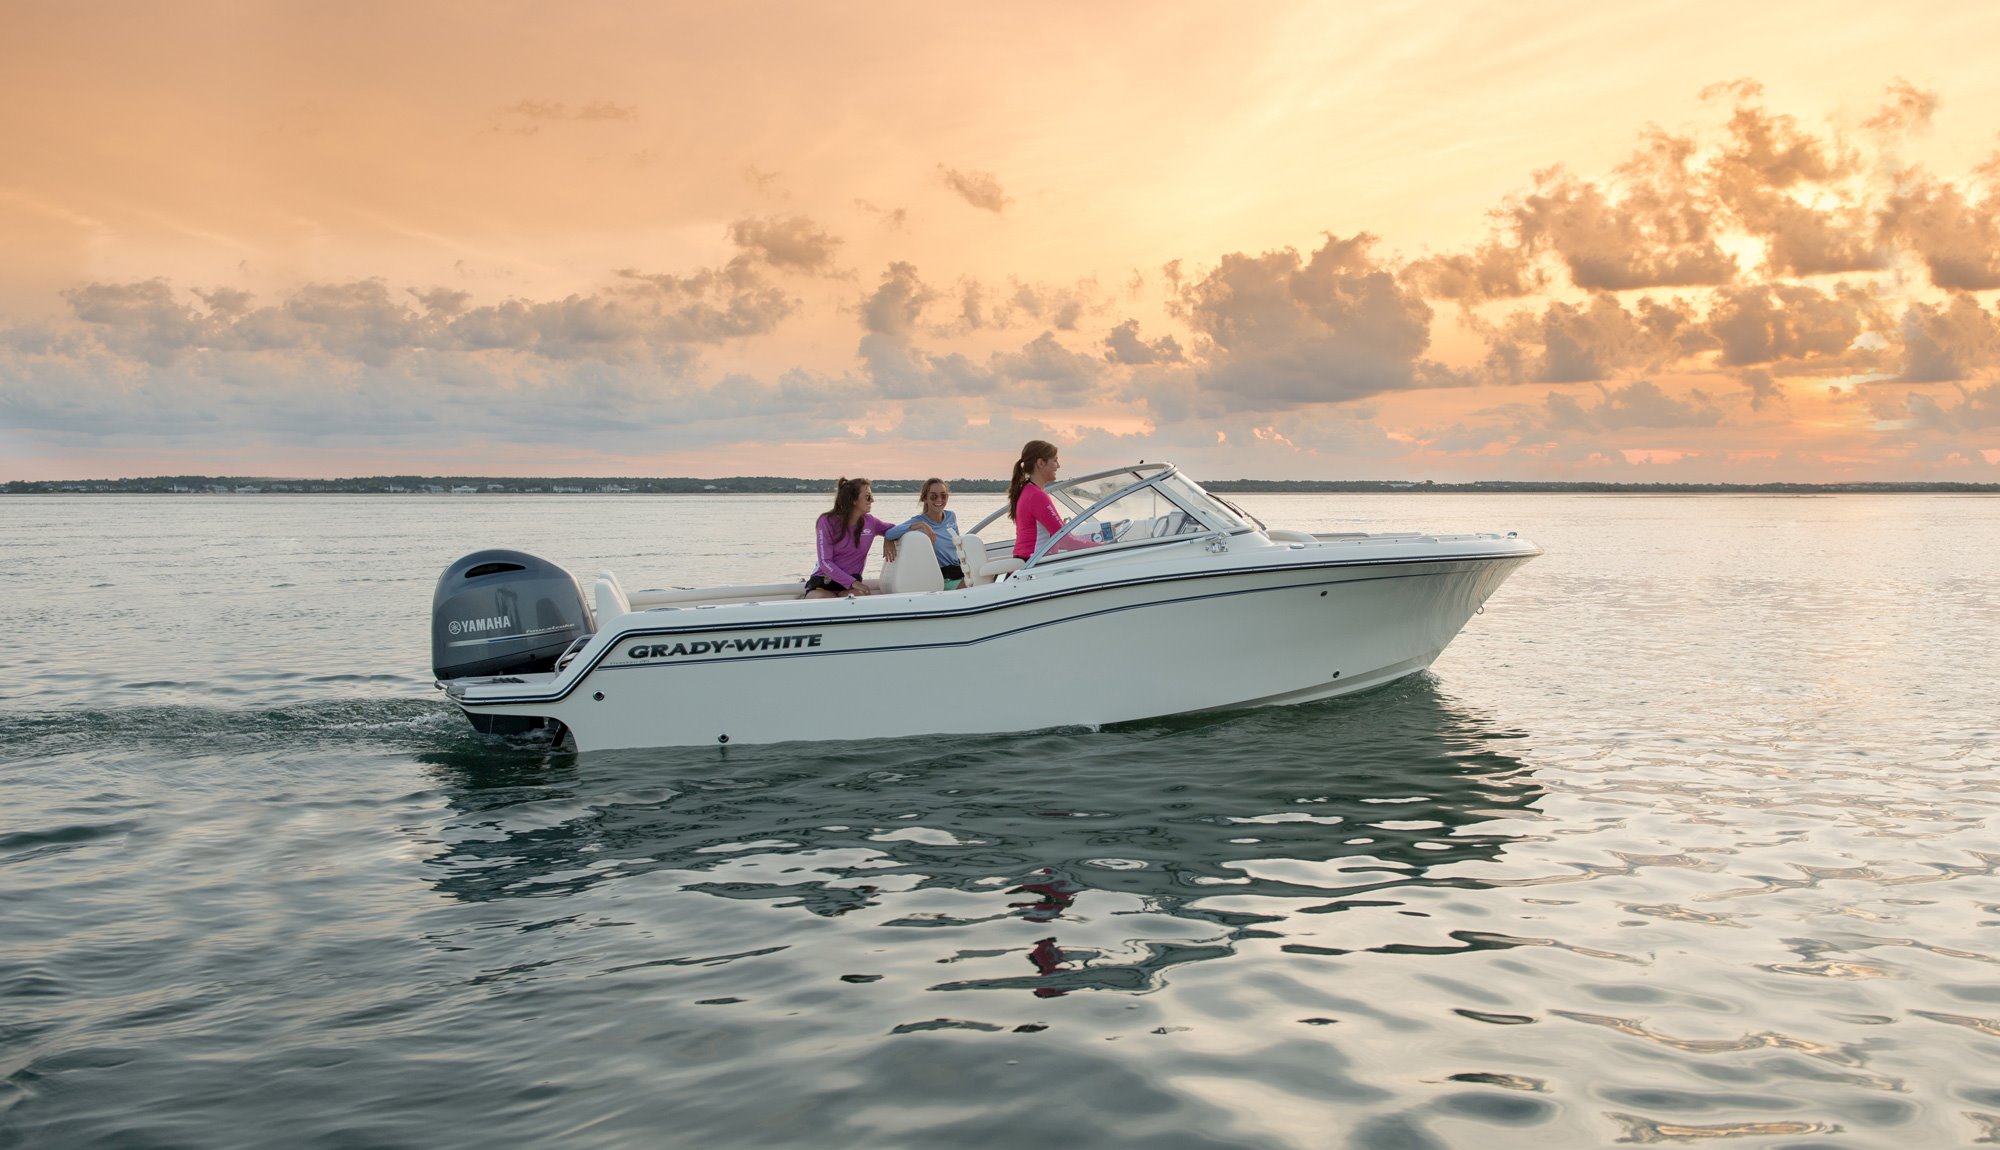 Grady-White Freedom 215 21-foot dual console starboard side with friends